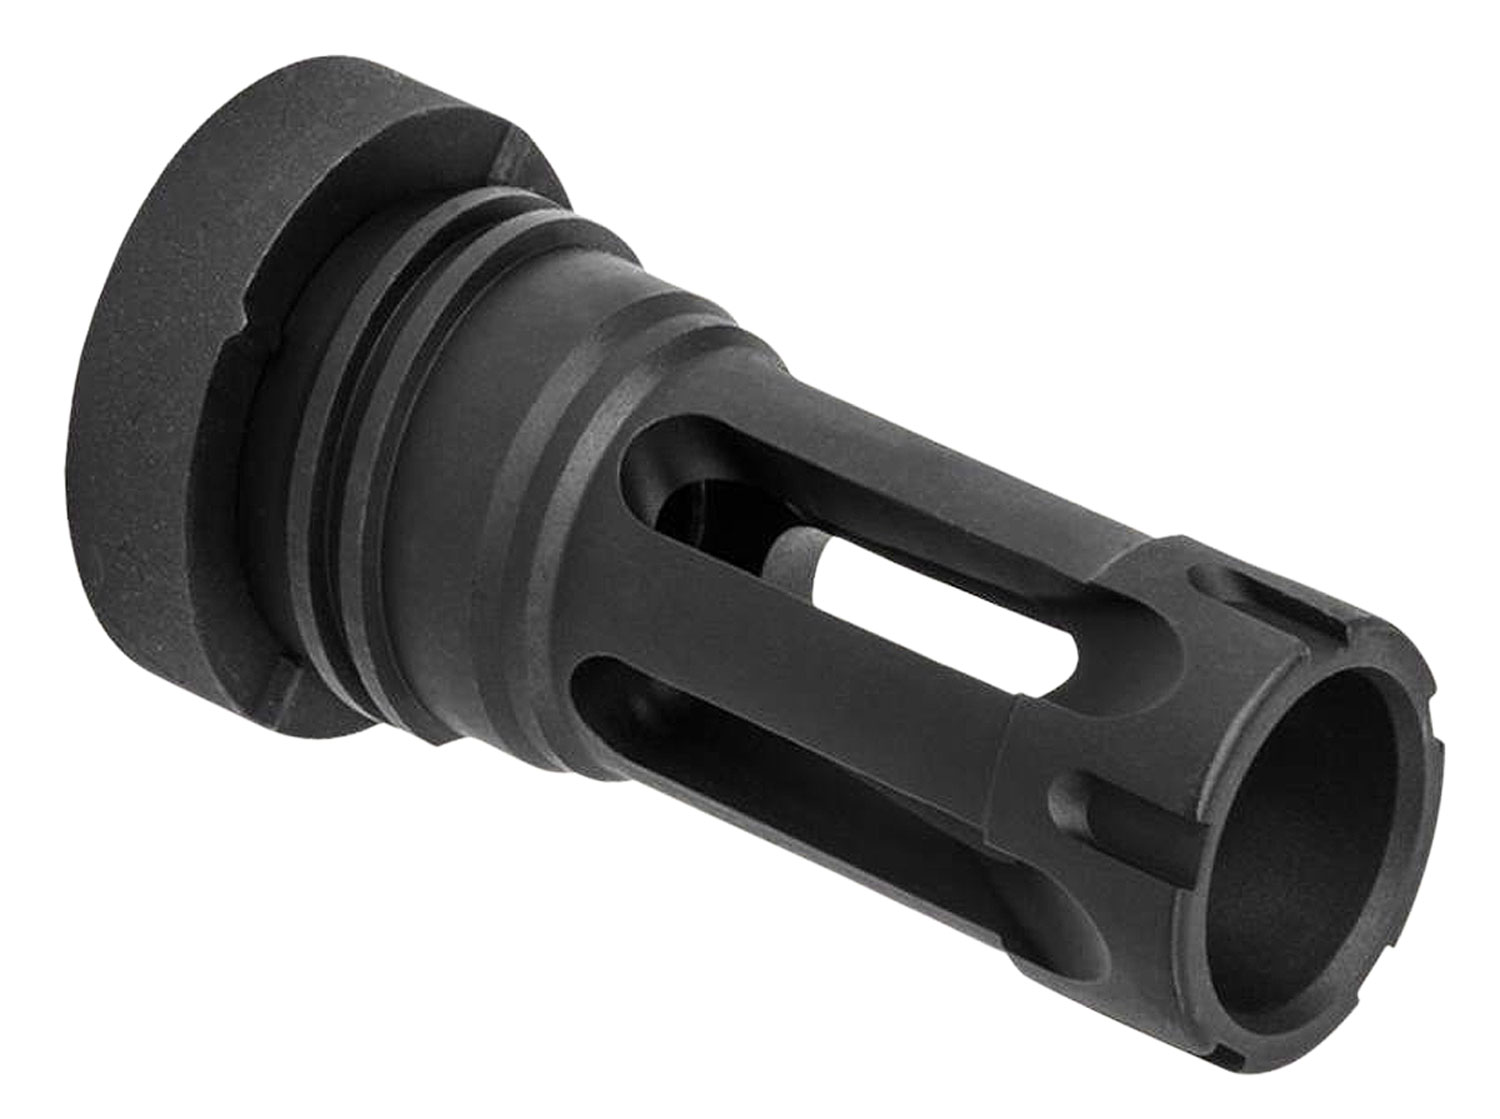 YHM QD FLASH HIDER ASSEMBLY 7.62MM FOR 5/8X24 THREADS